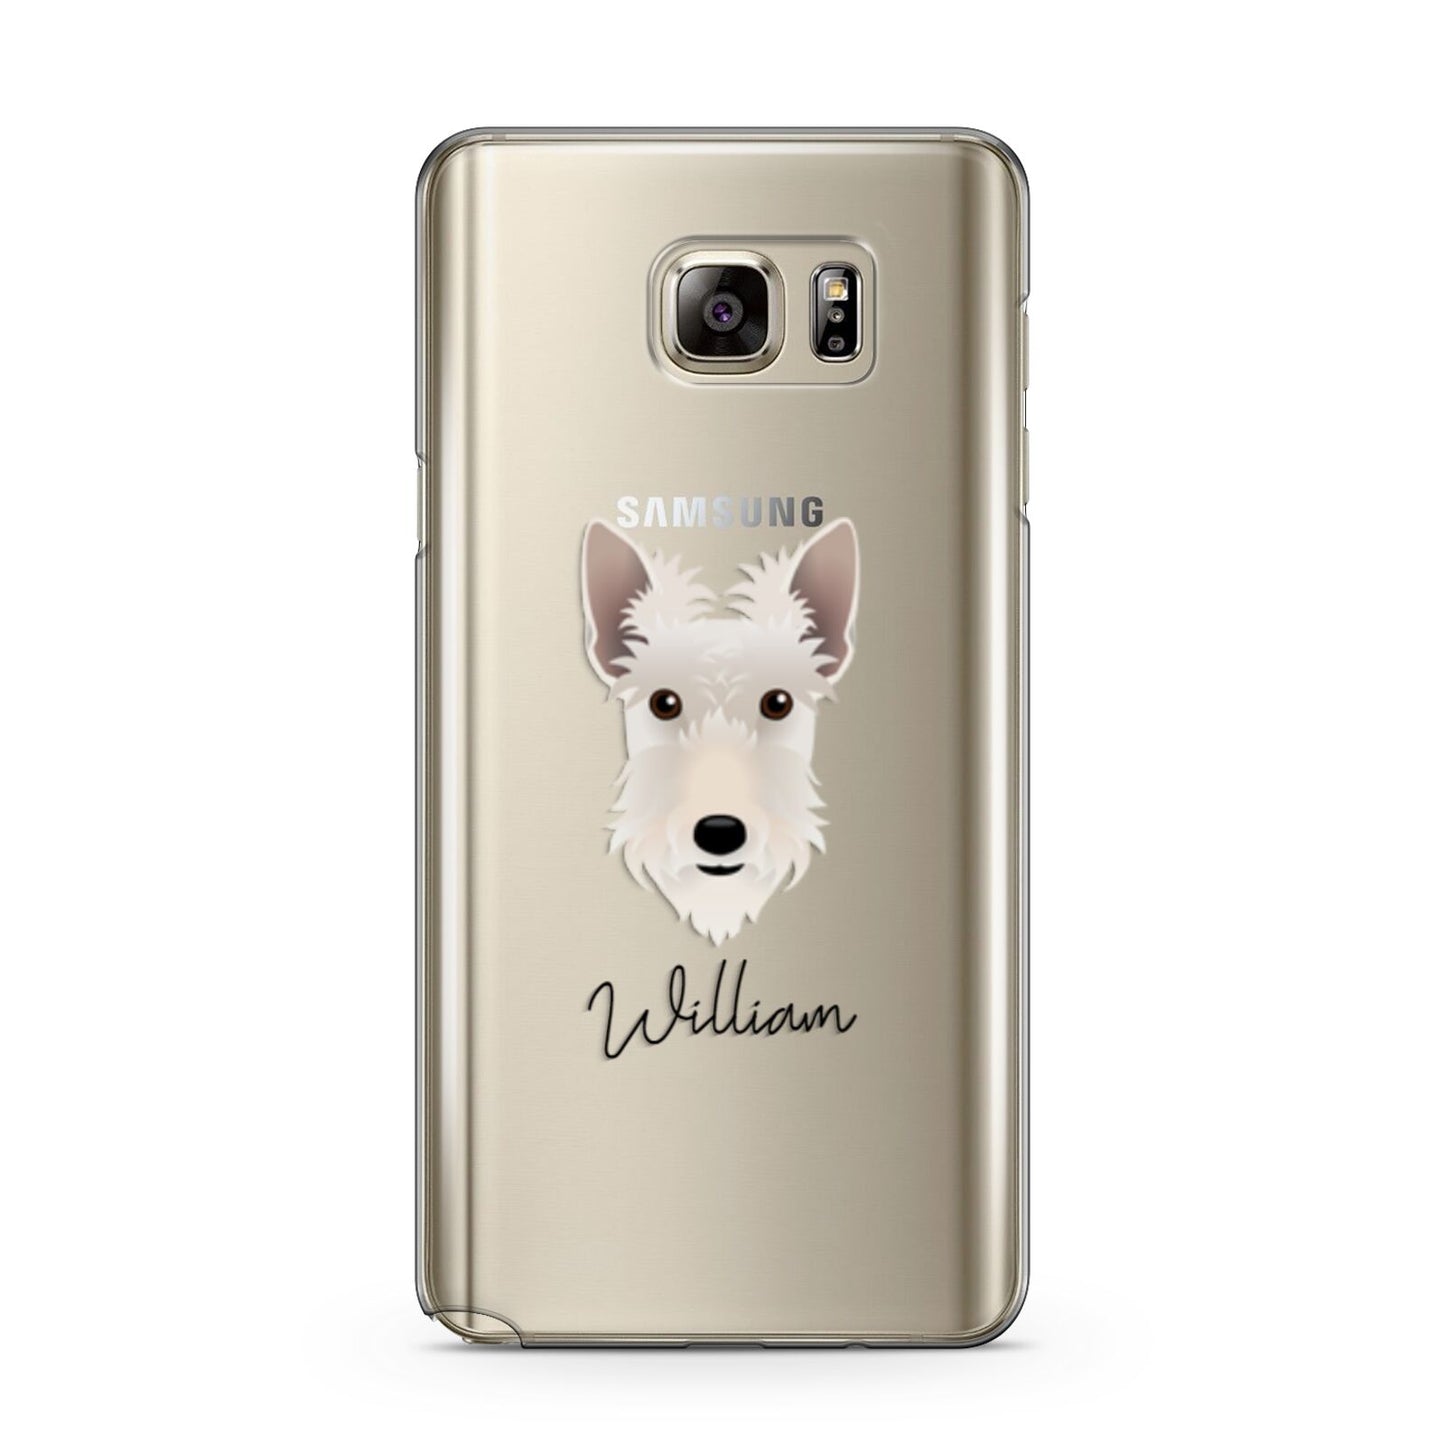 Scottish Terrier Personalised Samsung Galaxy Note 5 Case